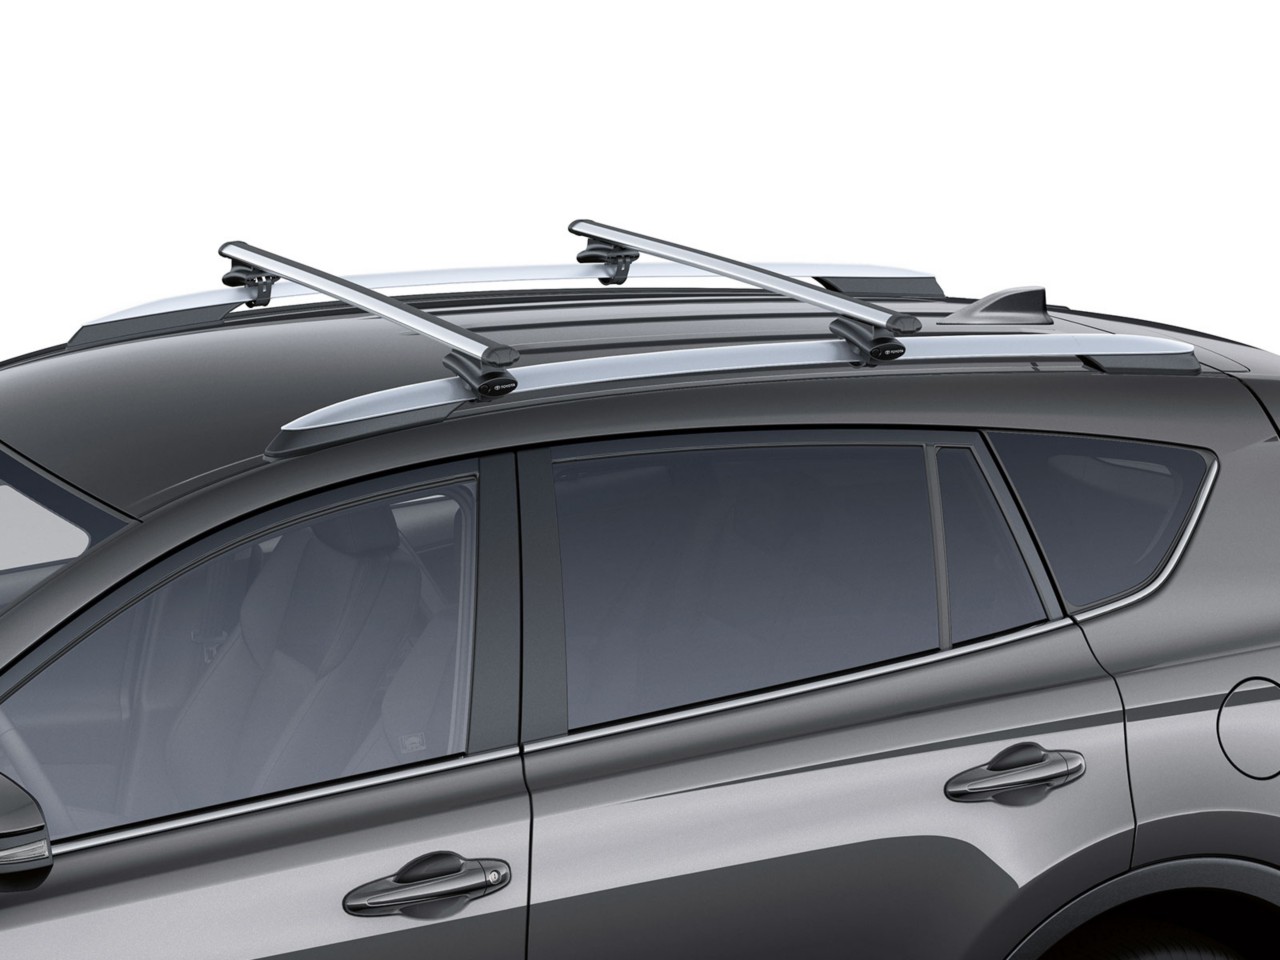 Roof Rack with nothing attached